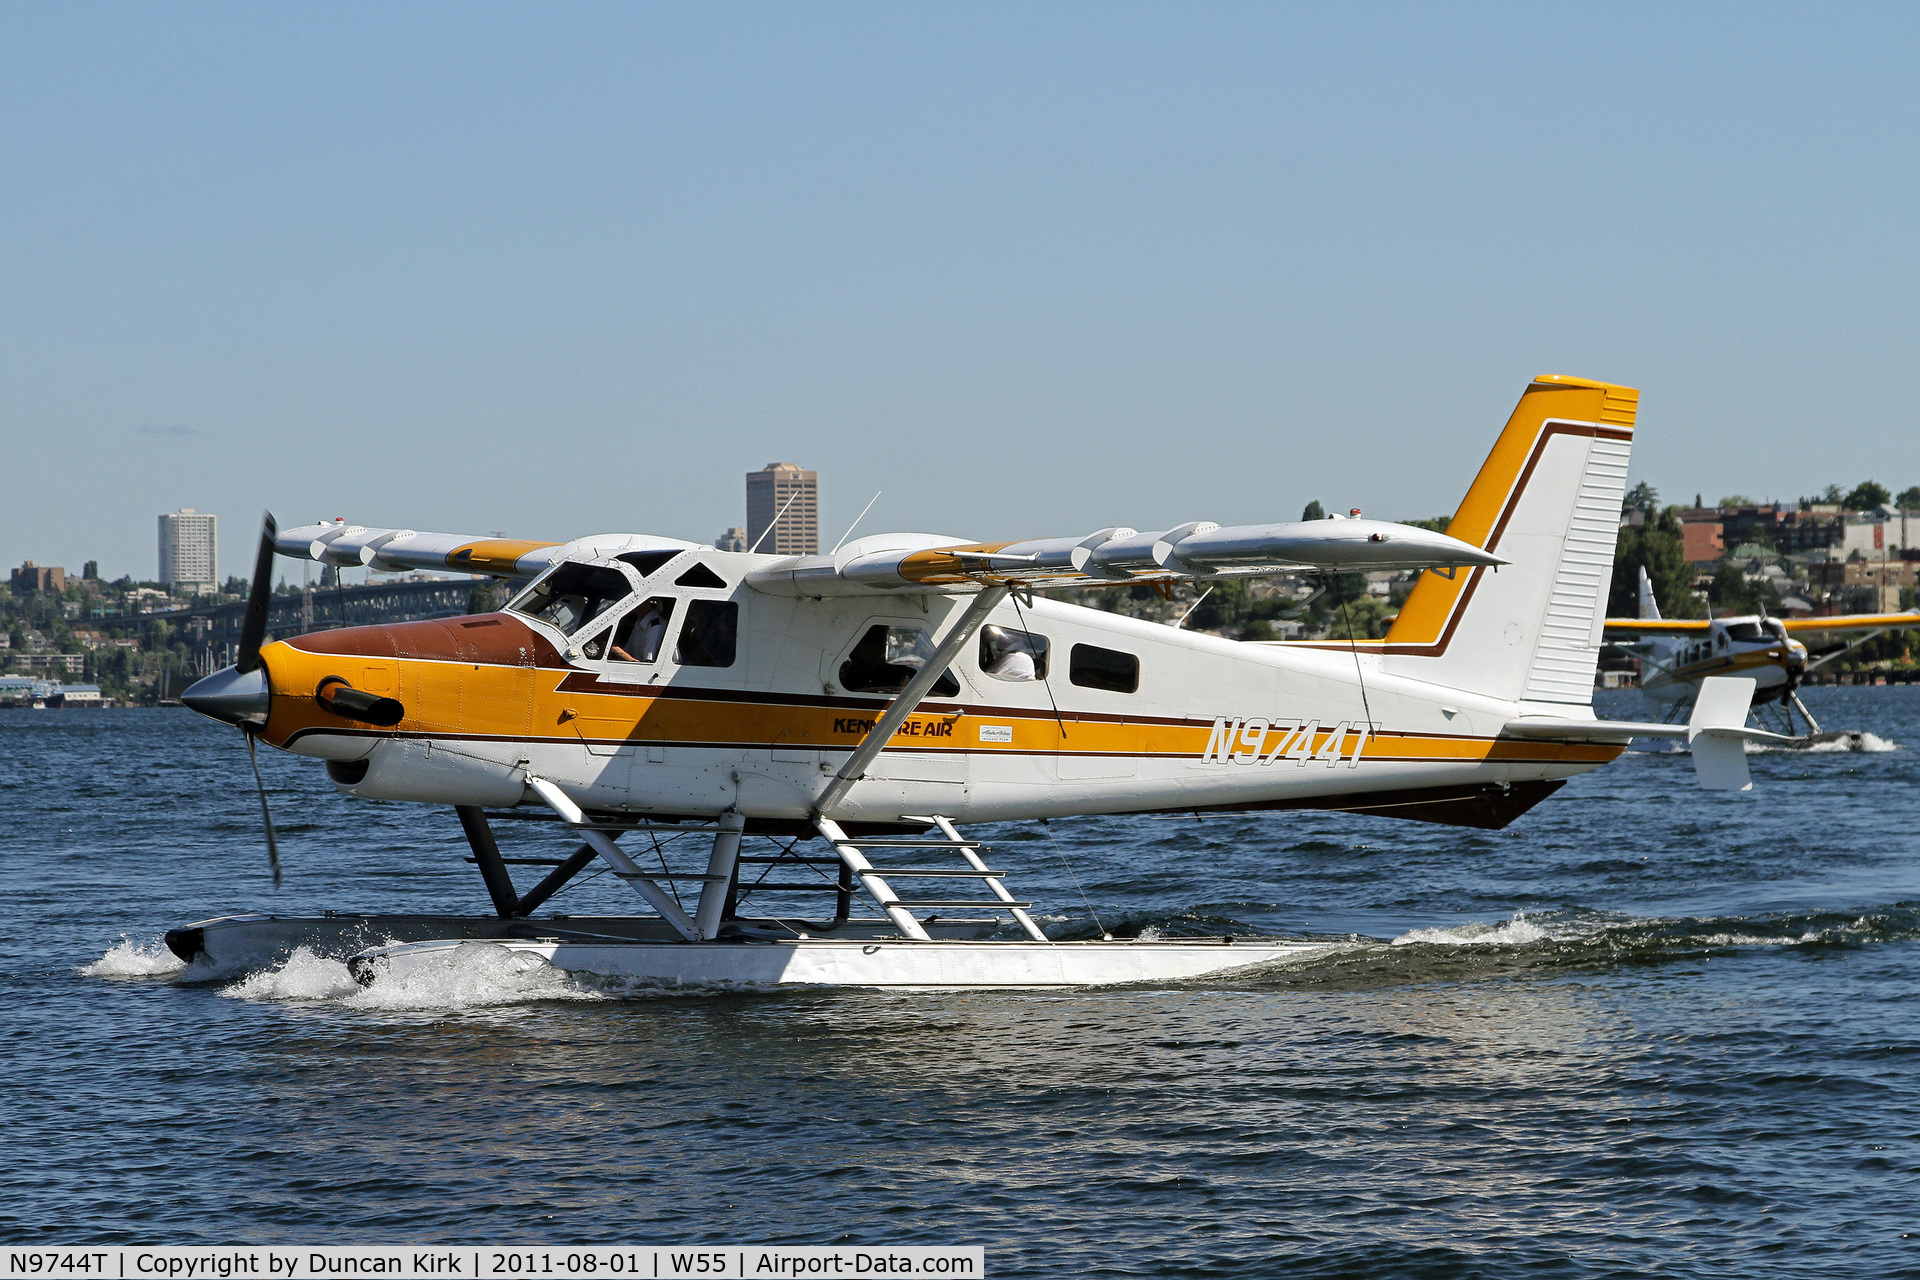 N9744T, 1968 De Havilland Canada DHC-2 Beaver Mk.3 C/N 1692, Kenmore Beaver taxiis in to Kenmore Lake Union's facility with a comany Turbo Otter right behind it